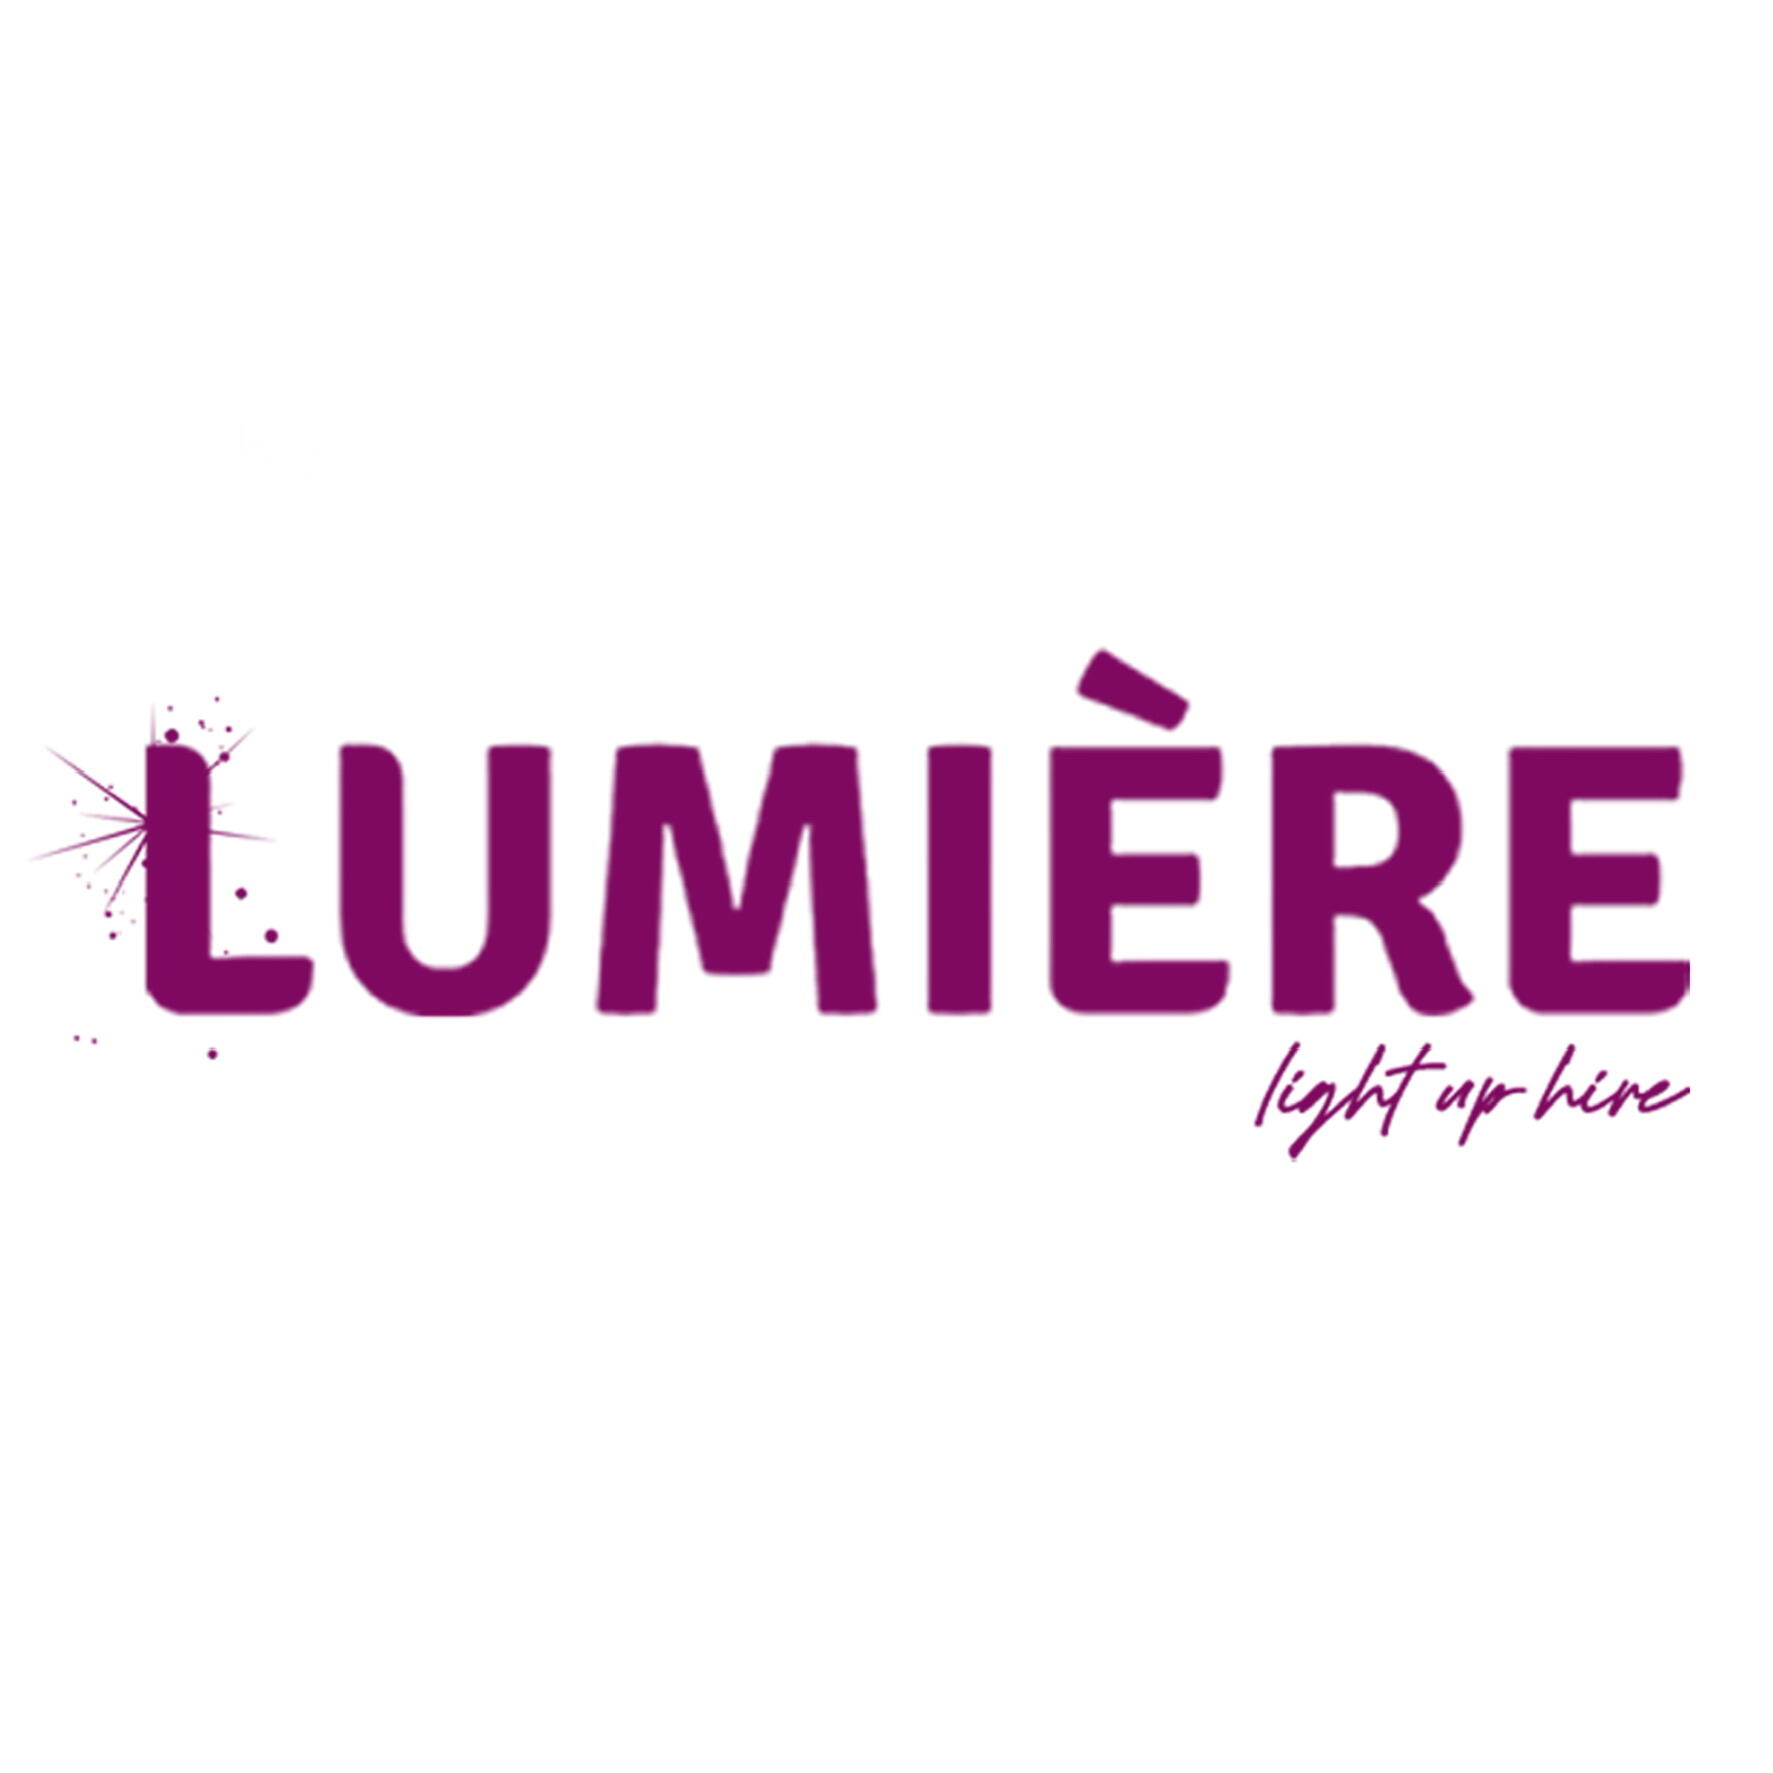 LED Light Up Number 18 - Lumiere Light up Hire